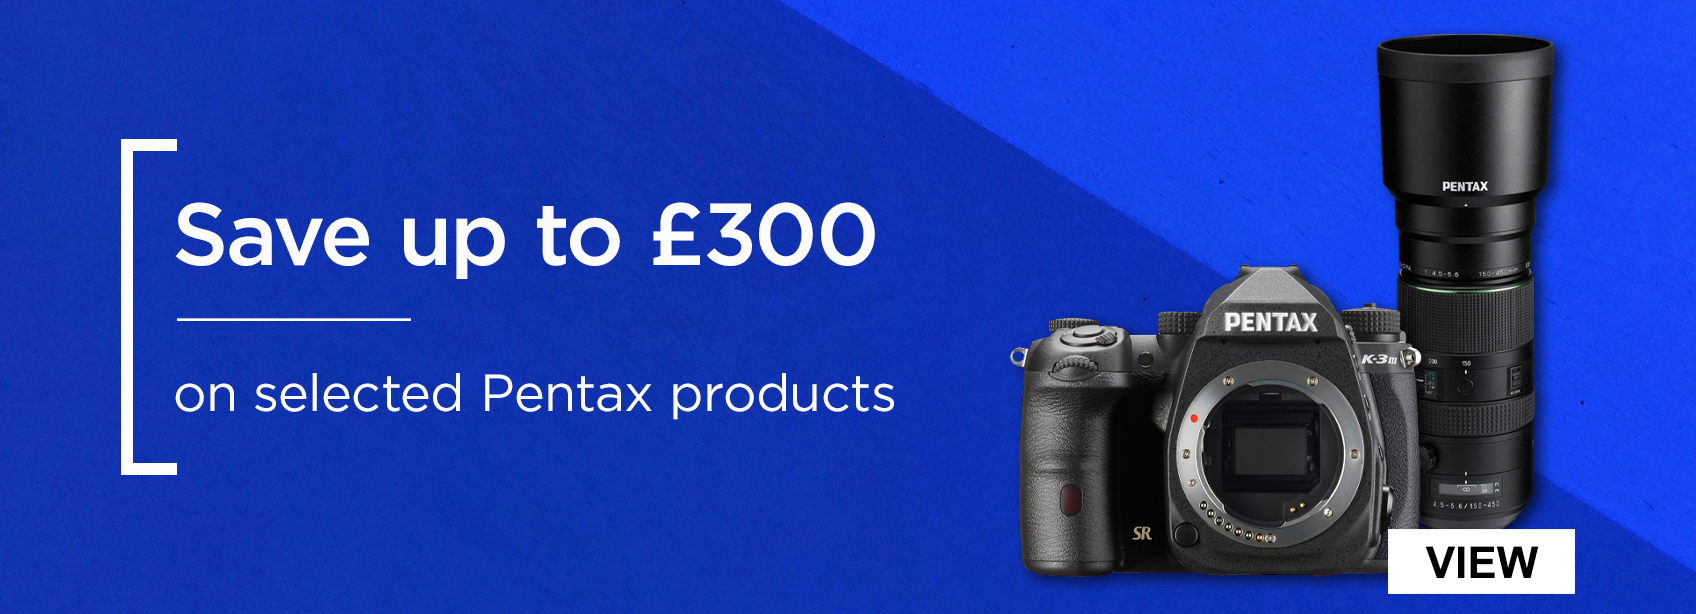 Save up to £300 on selected Pentax products